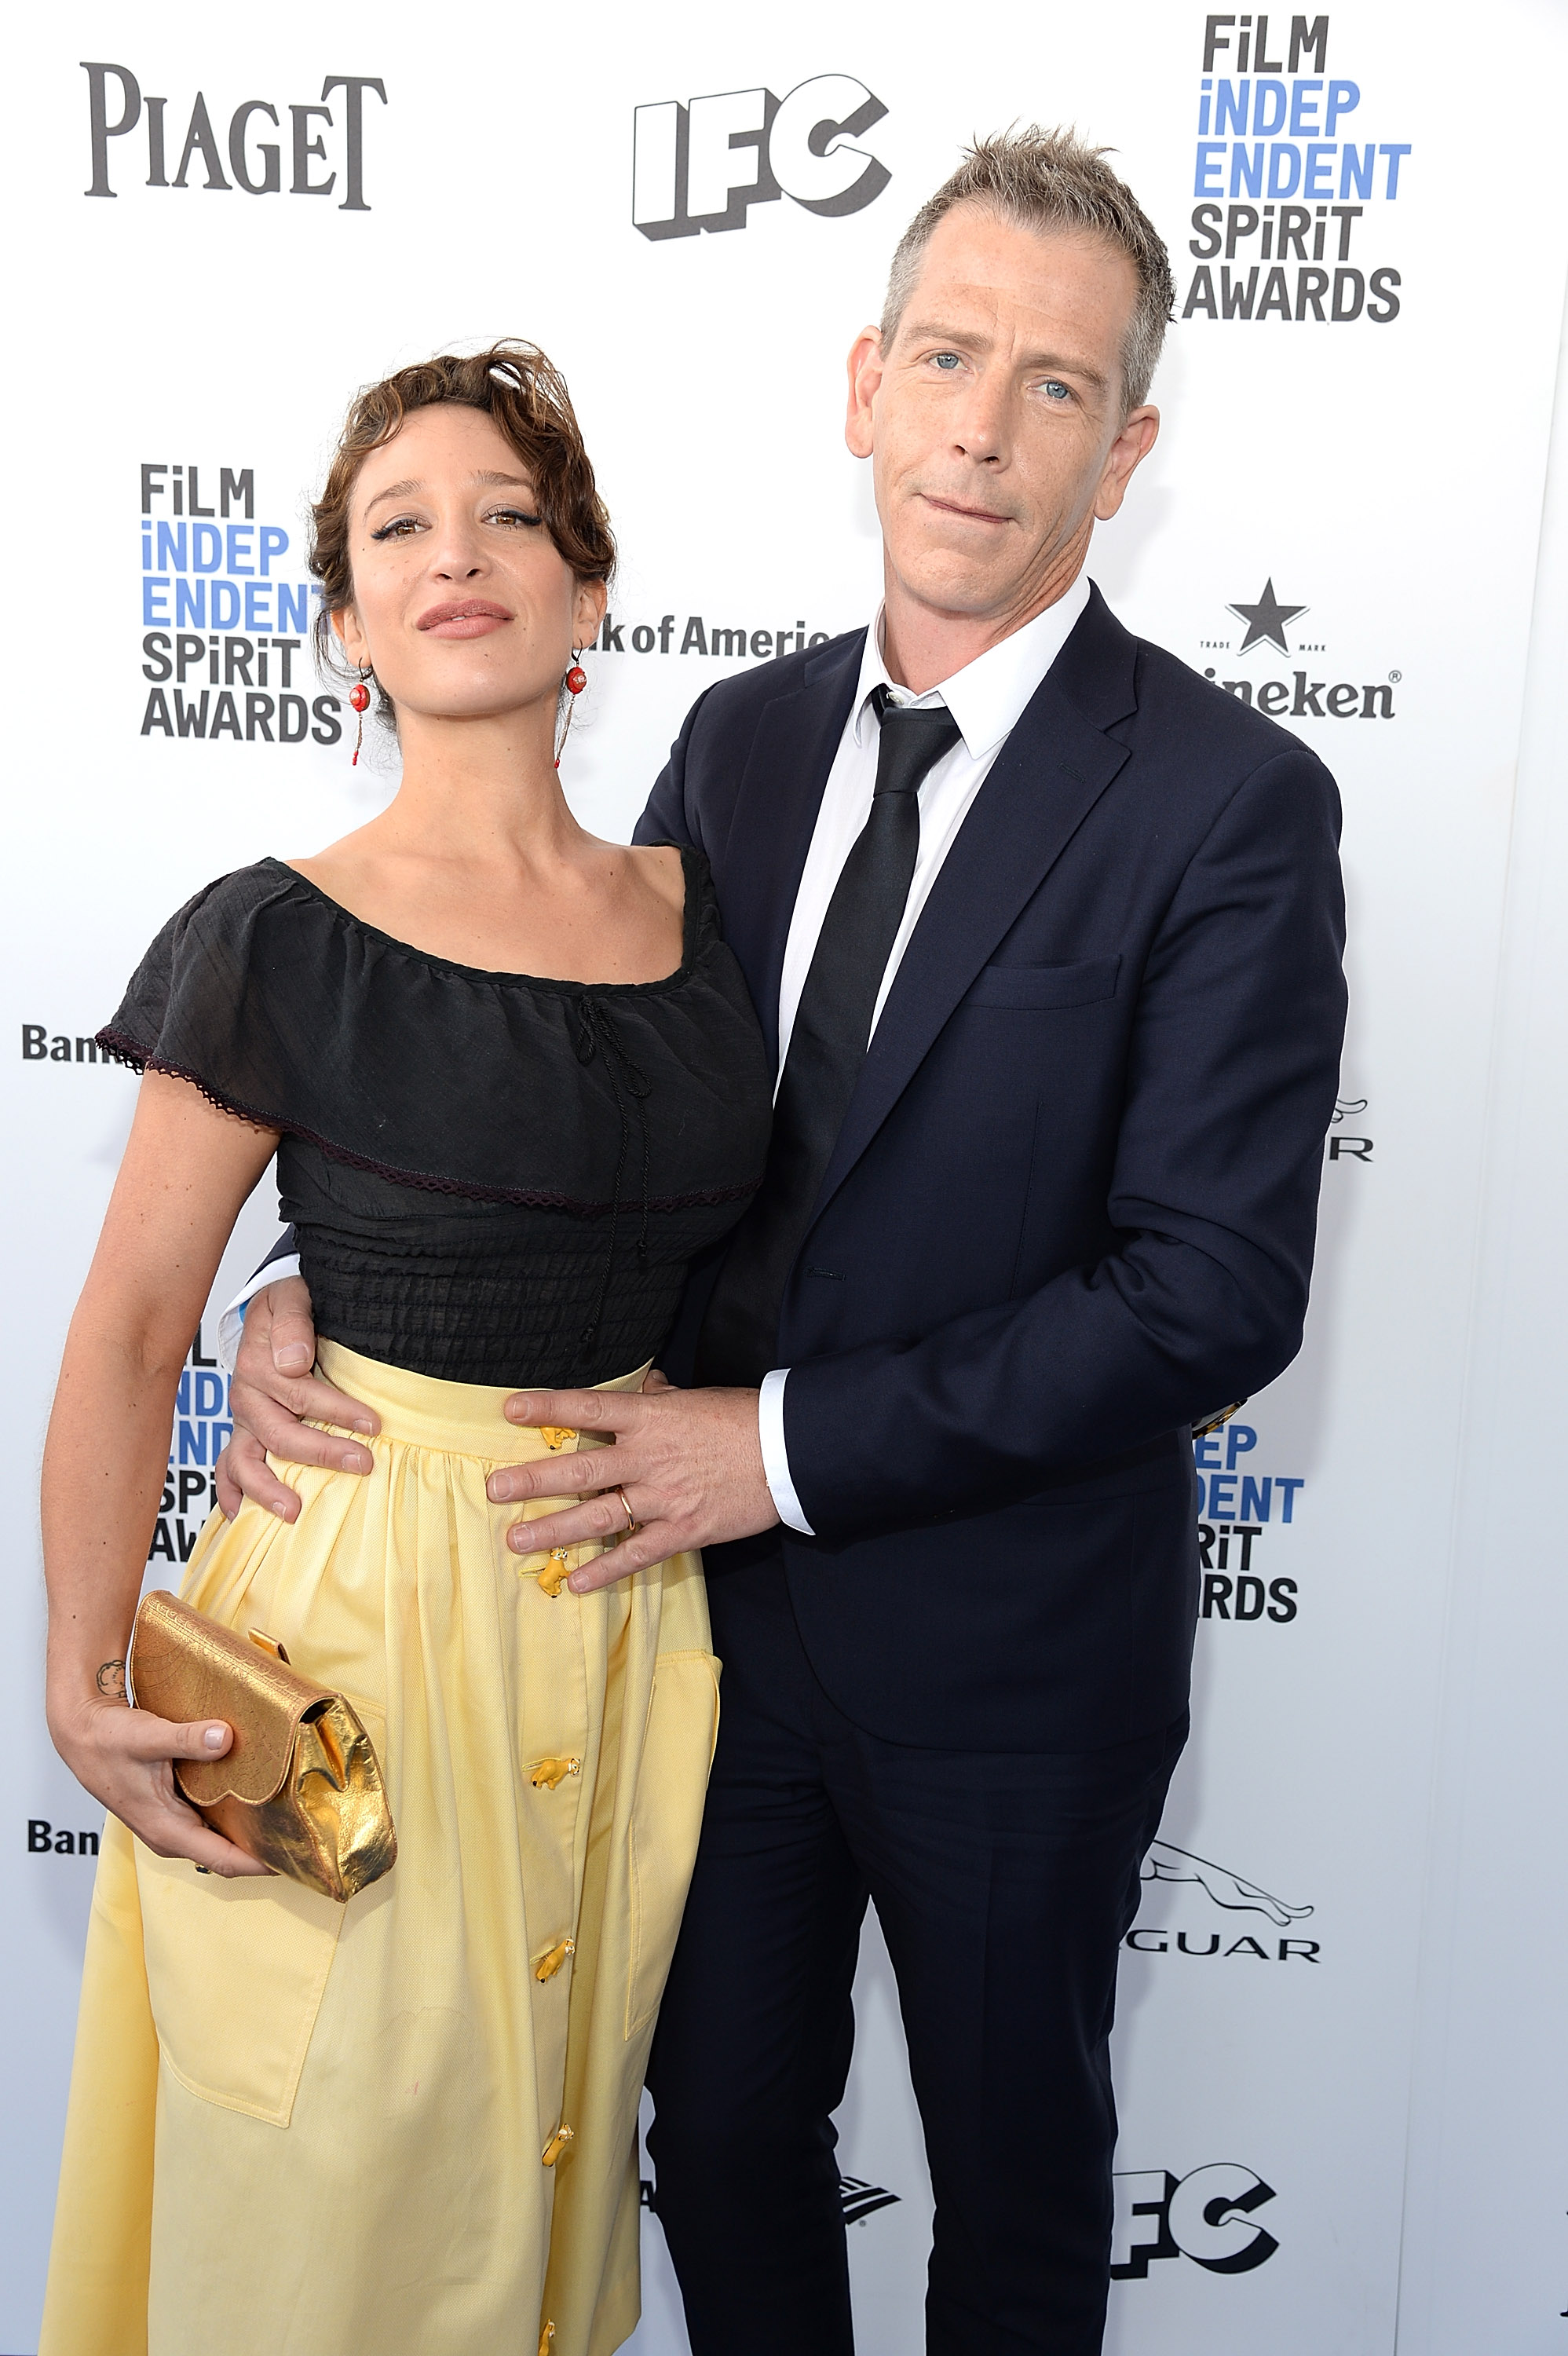 Emma Forrest and Ben Mendelsohn at the 2016 Film Independent Spirit Awards on February 27, 2016, in Santa Monica, California. | Source: Getty Images